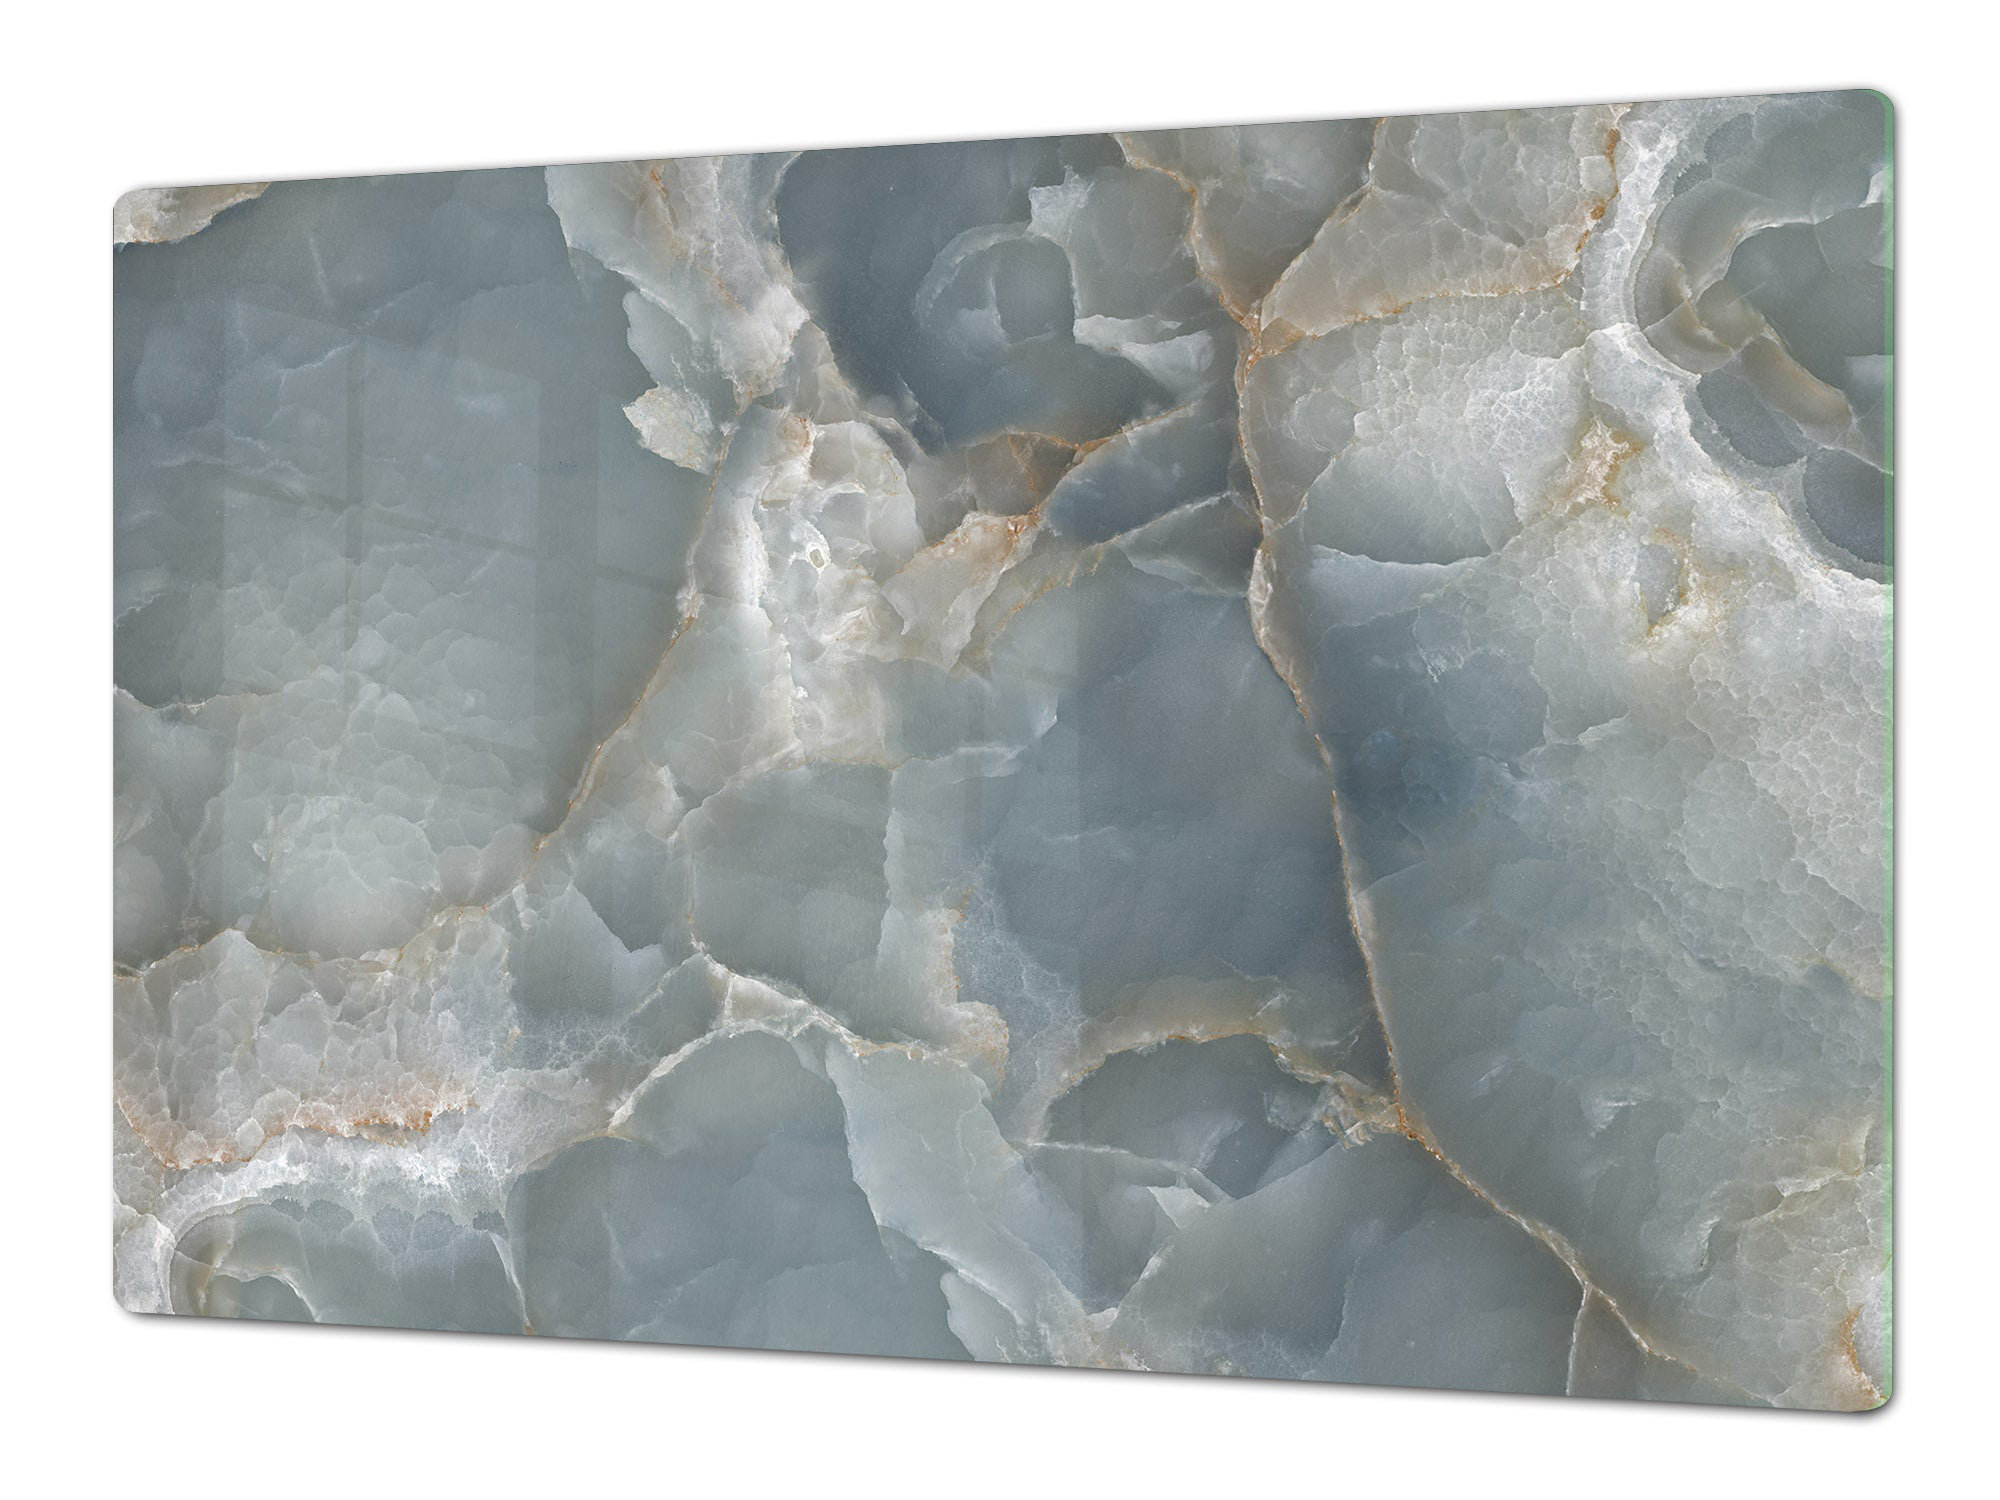 Festive Fit Home Stove Top Cover - Blue/Gray Marble Glass, Gas and